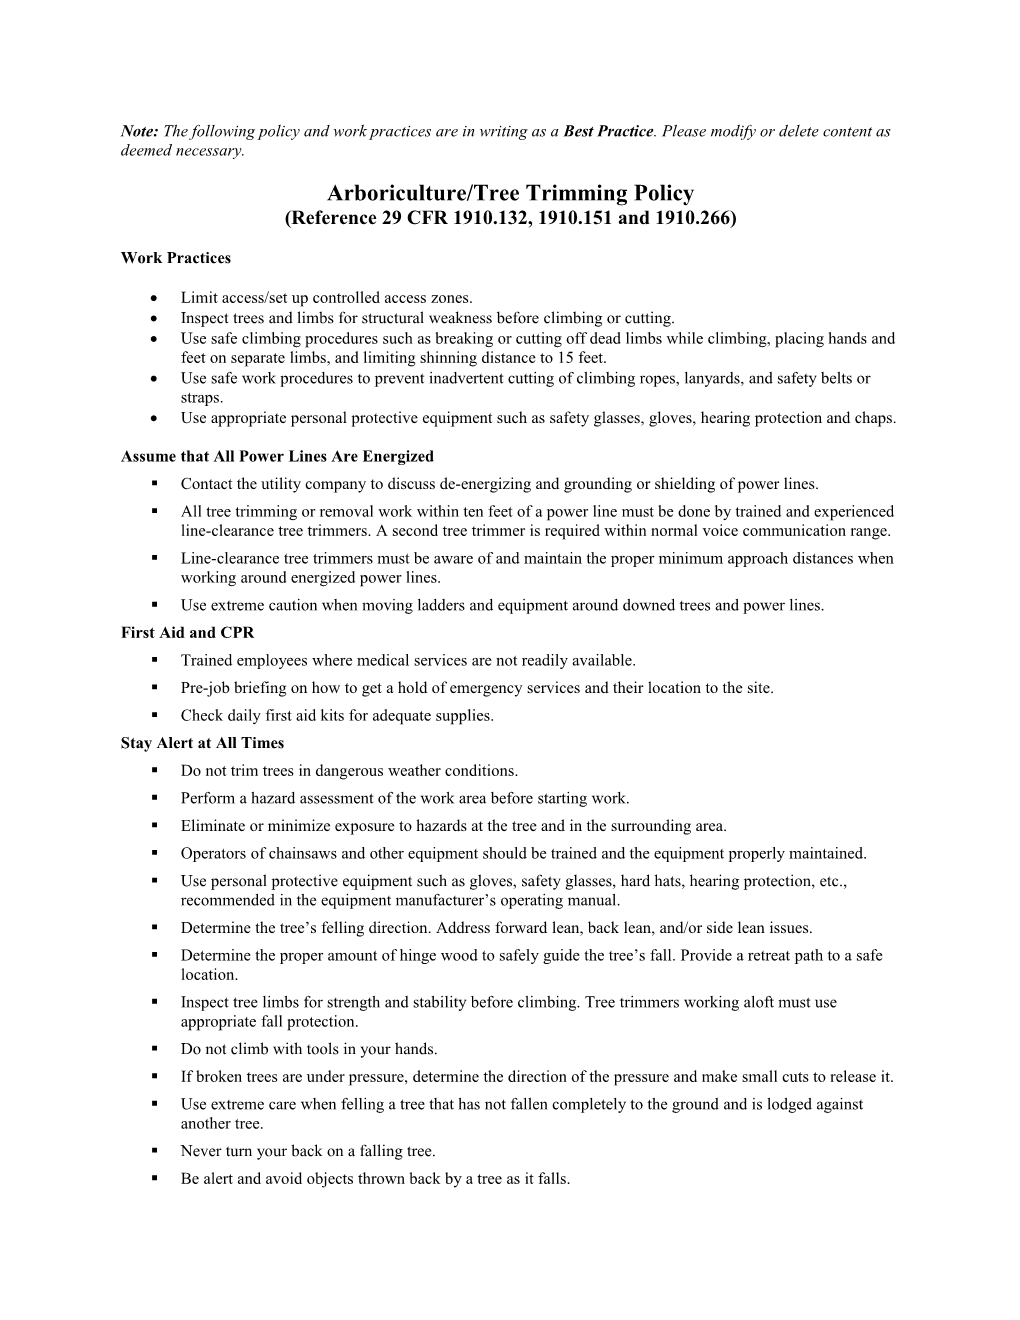 Arboriculture/Tree Trimming Policy